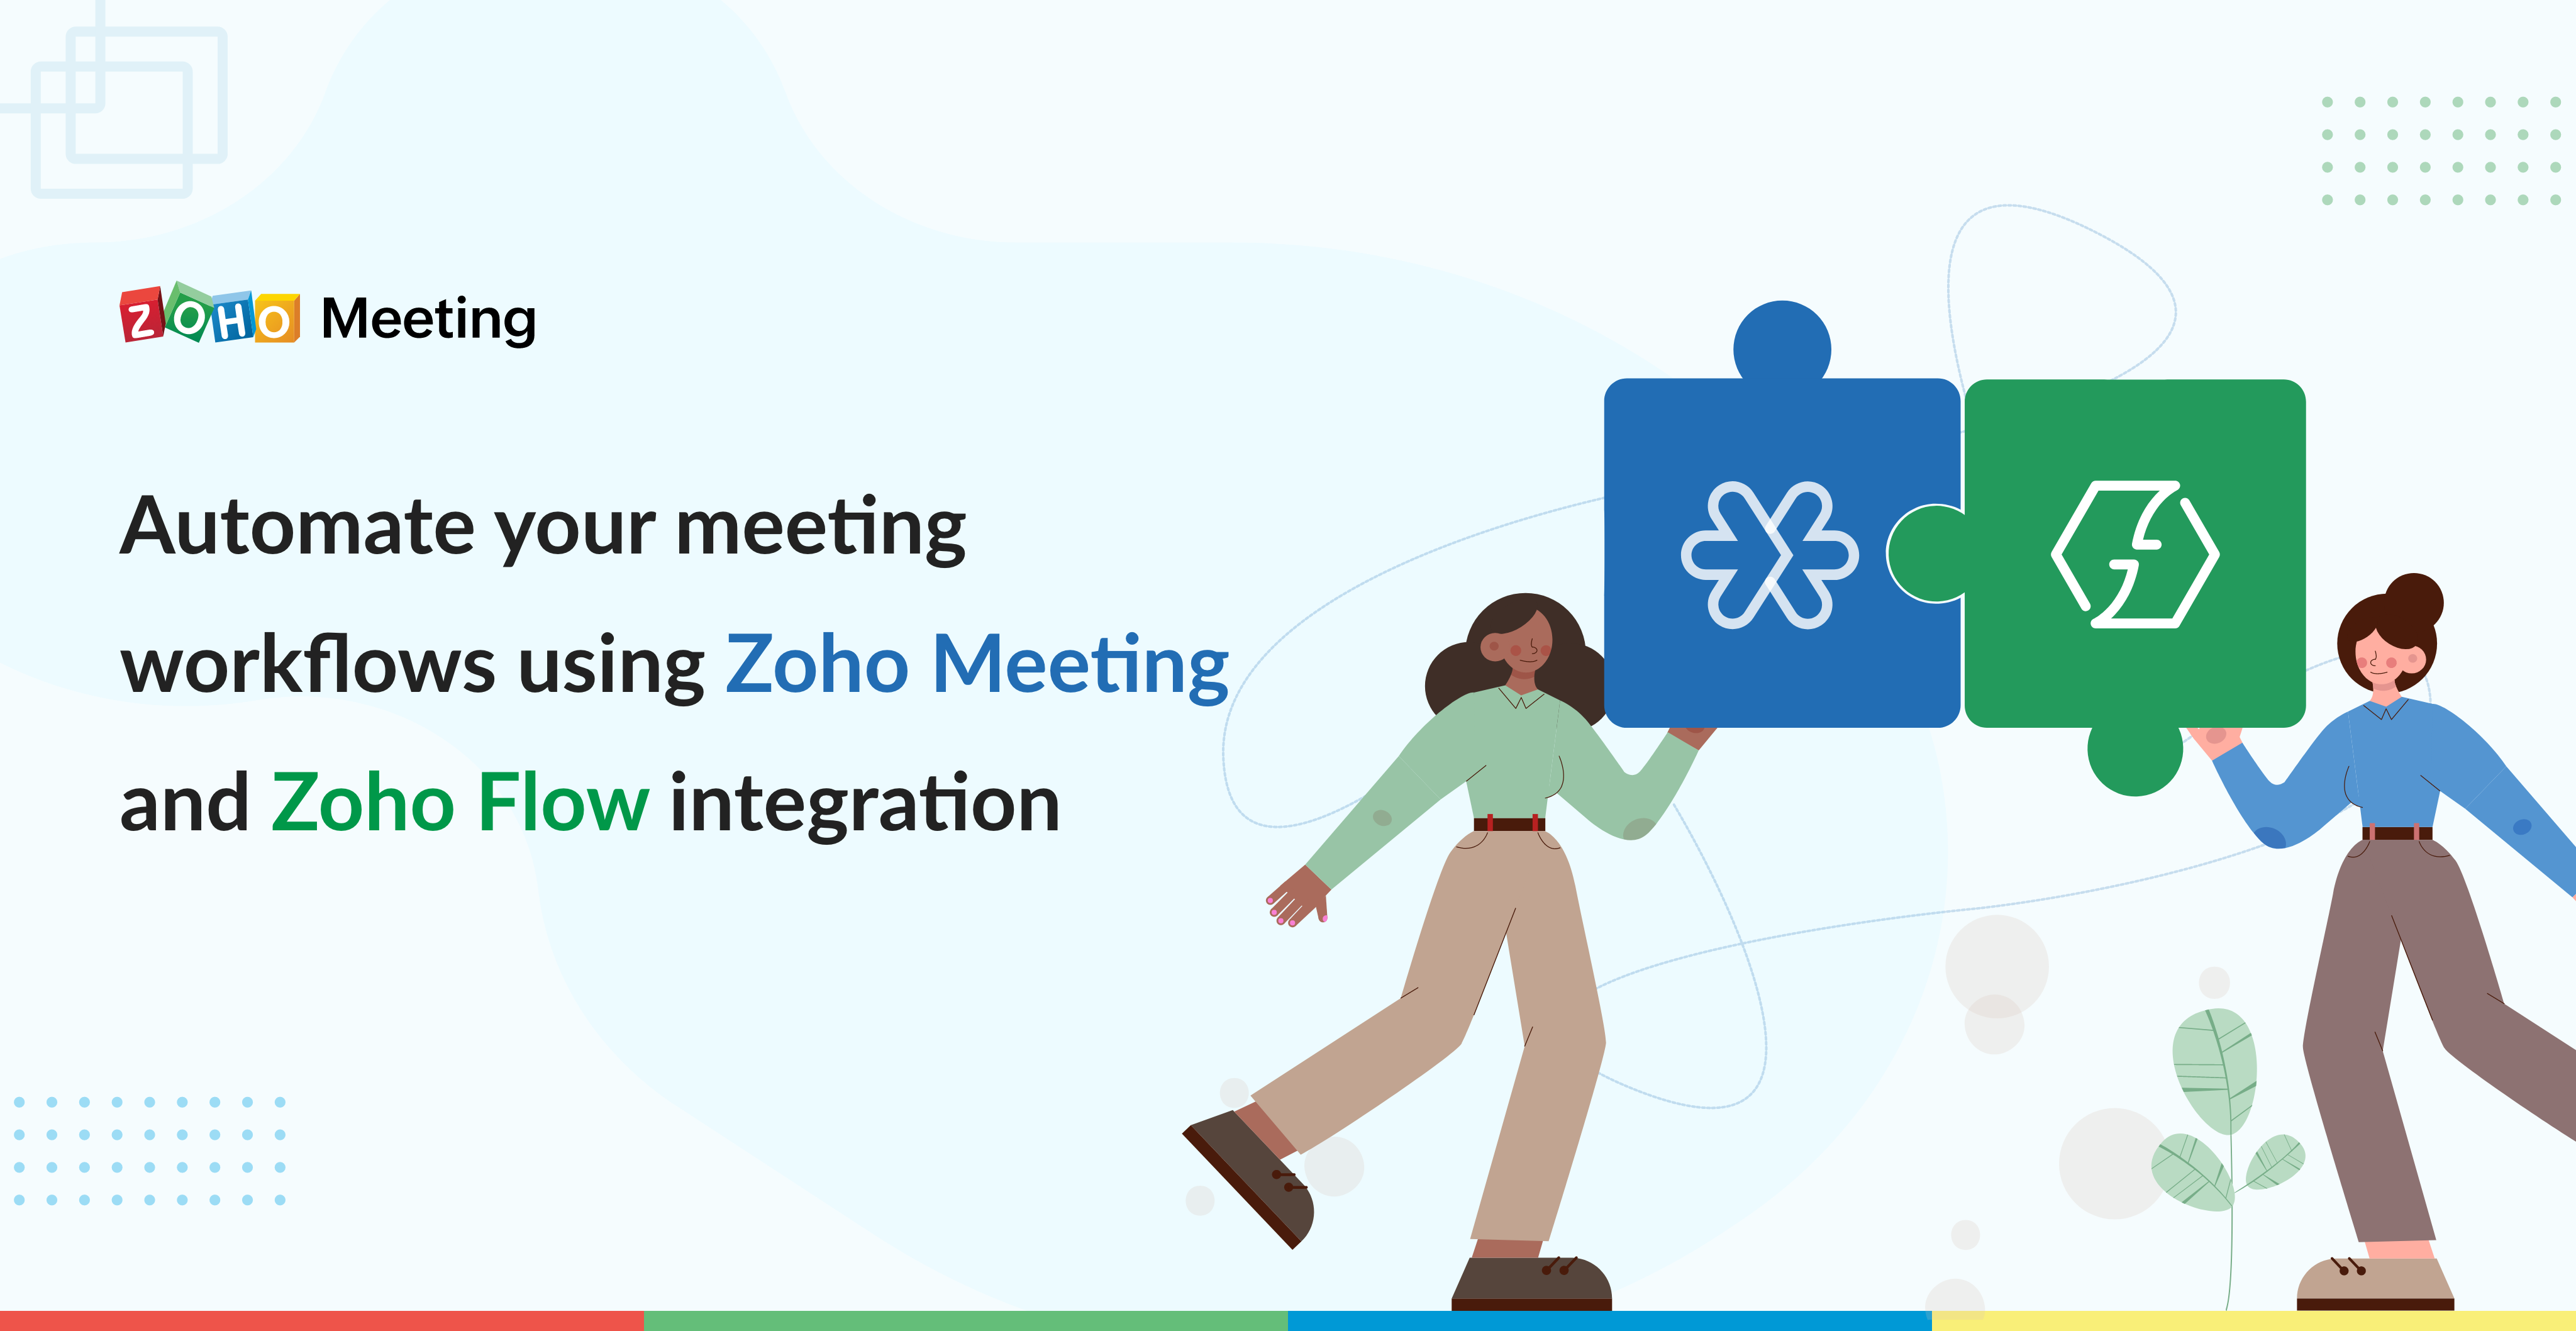 Automate your meeting workflows using Zoho Meeting and Zoho Flow integration